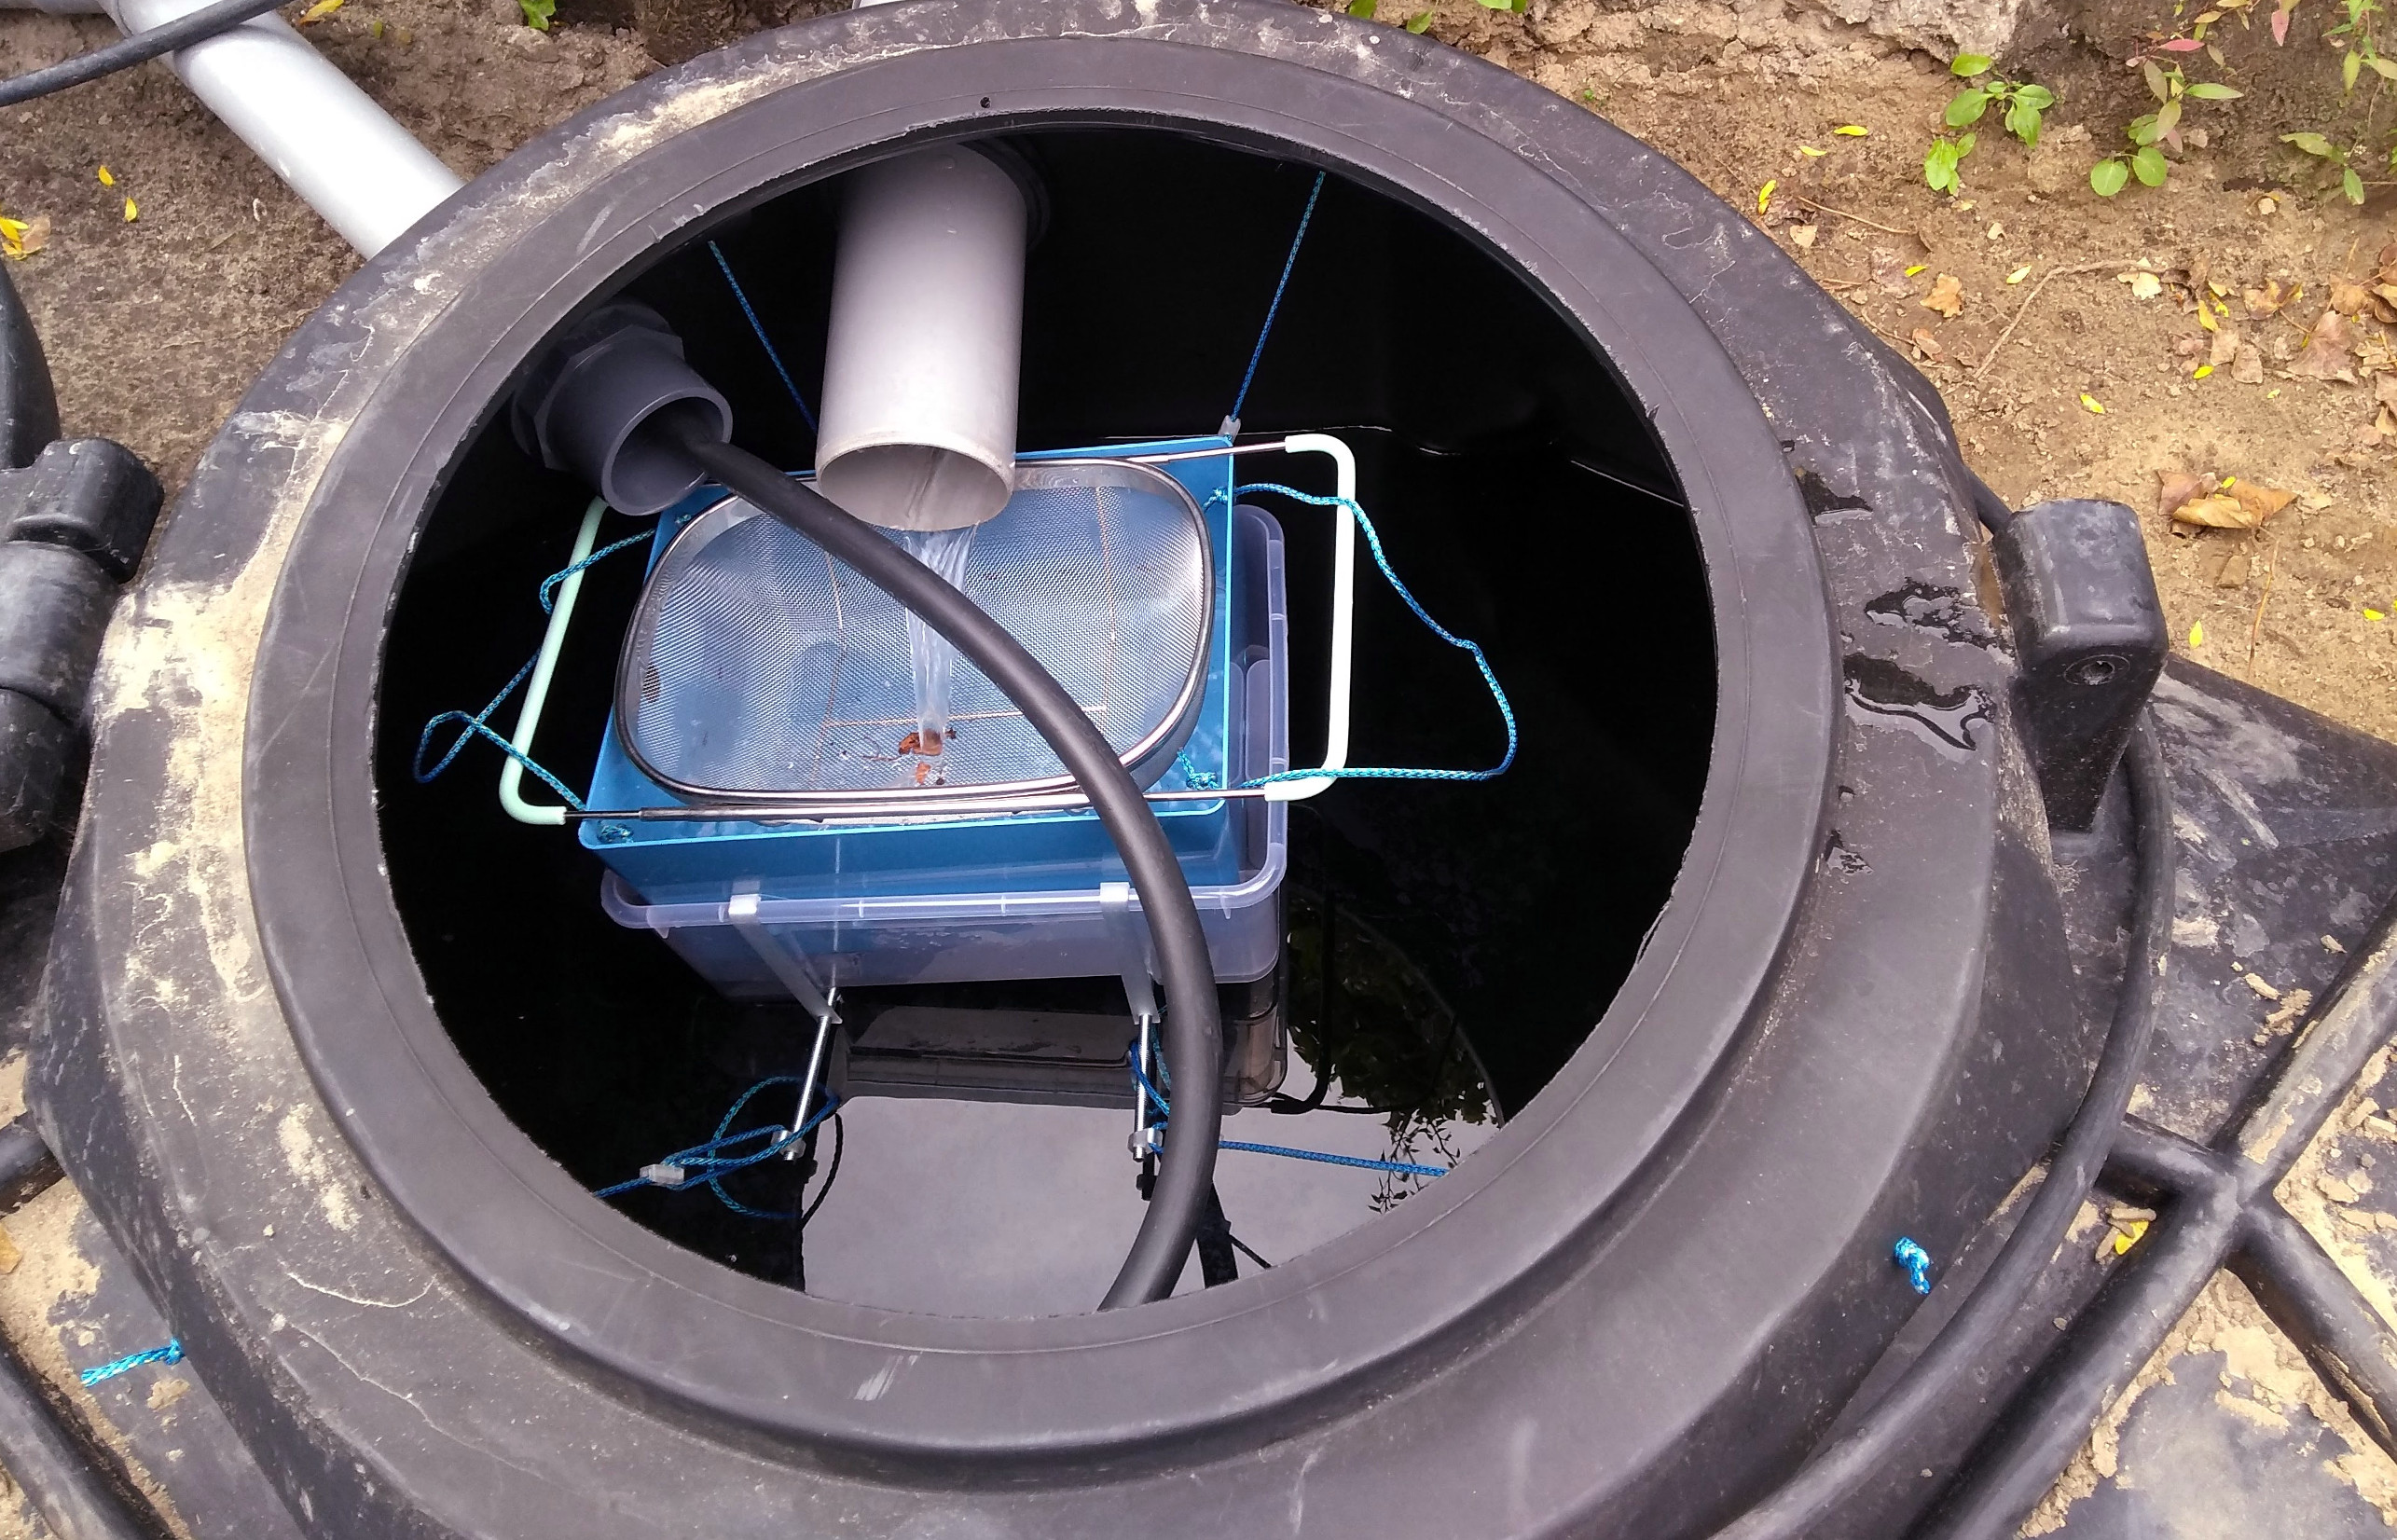 Rainwater filter/settling unit (out of modified Ikea products)